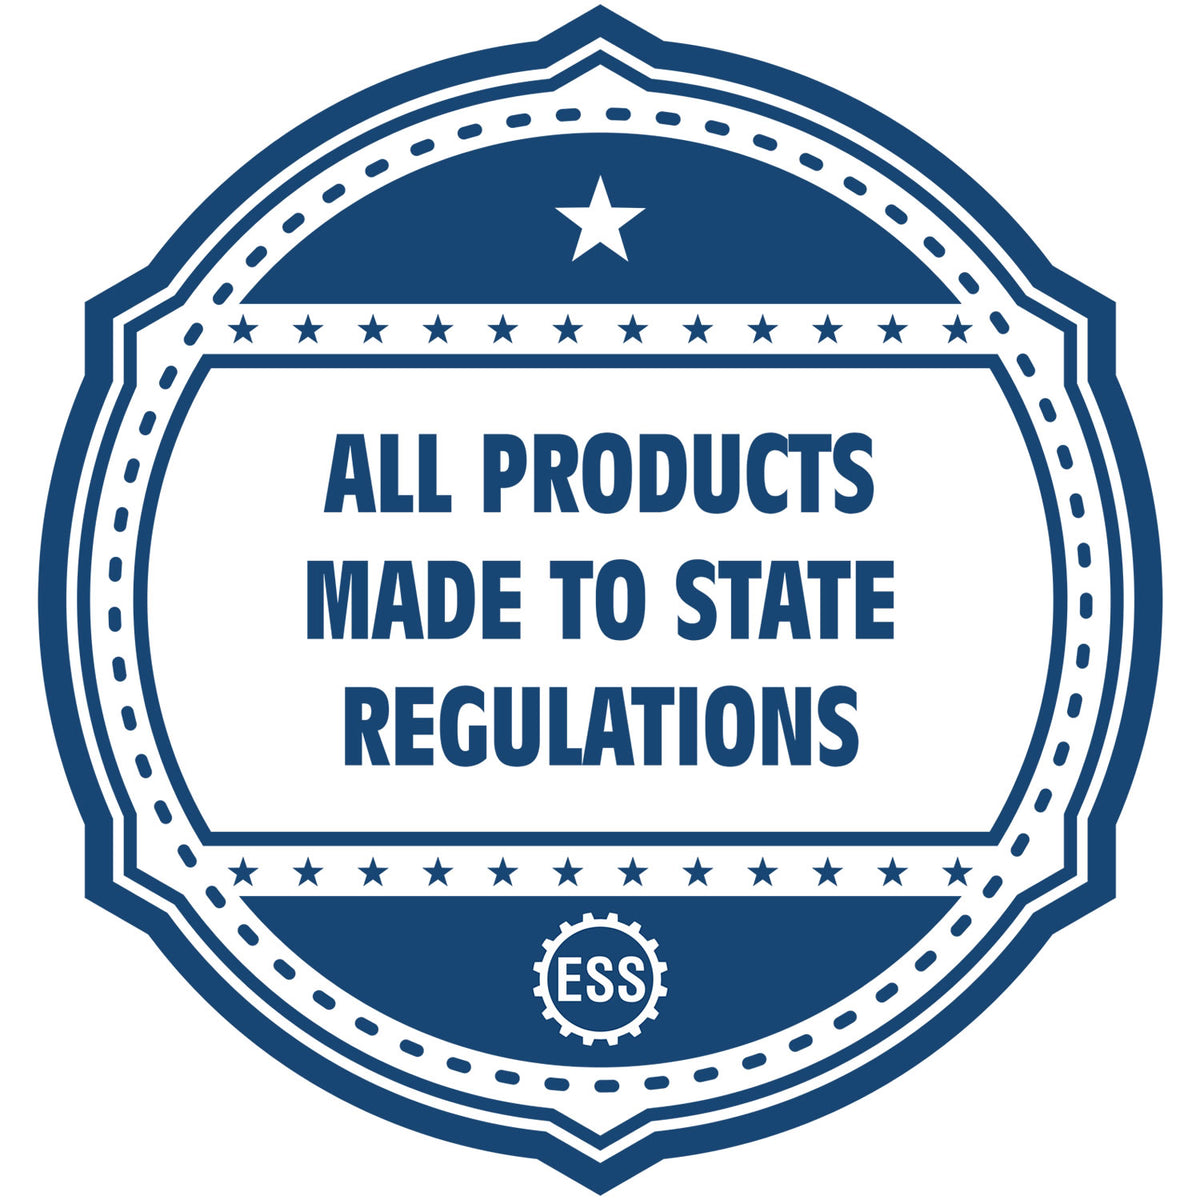 An icon or badge element for the Vermont Desk Architect Embossing Seal showing that this product is made in compliance with state regulations.